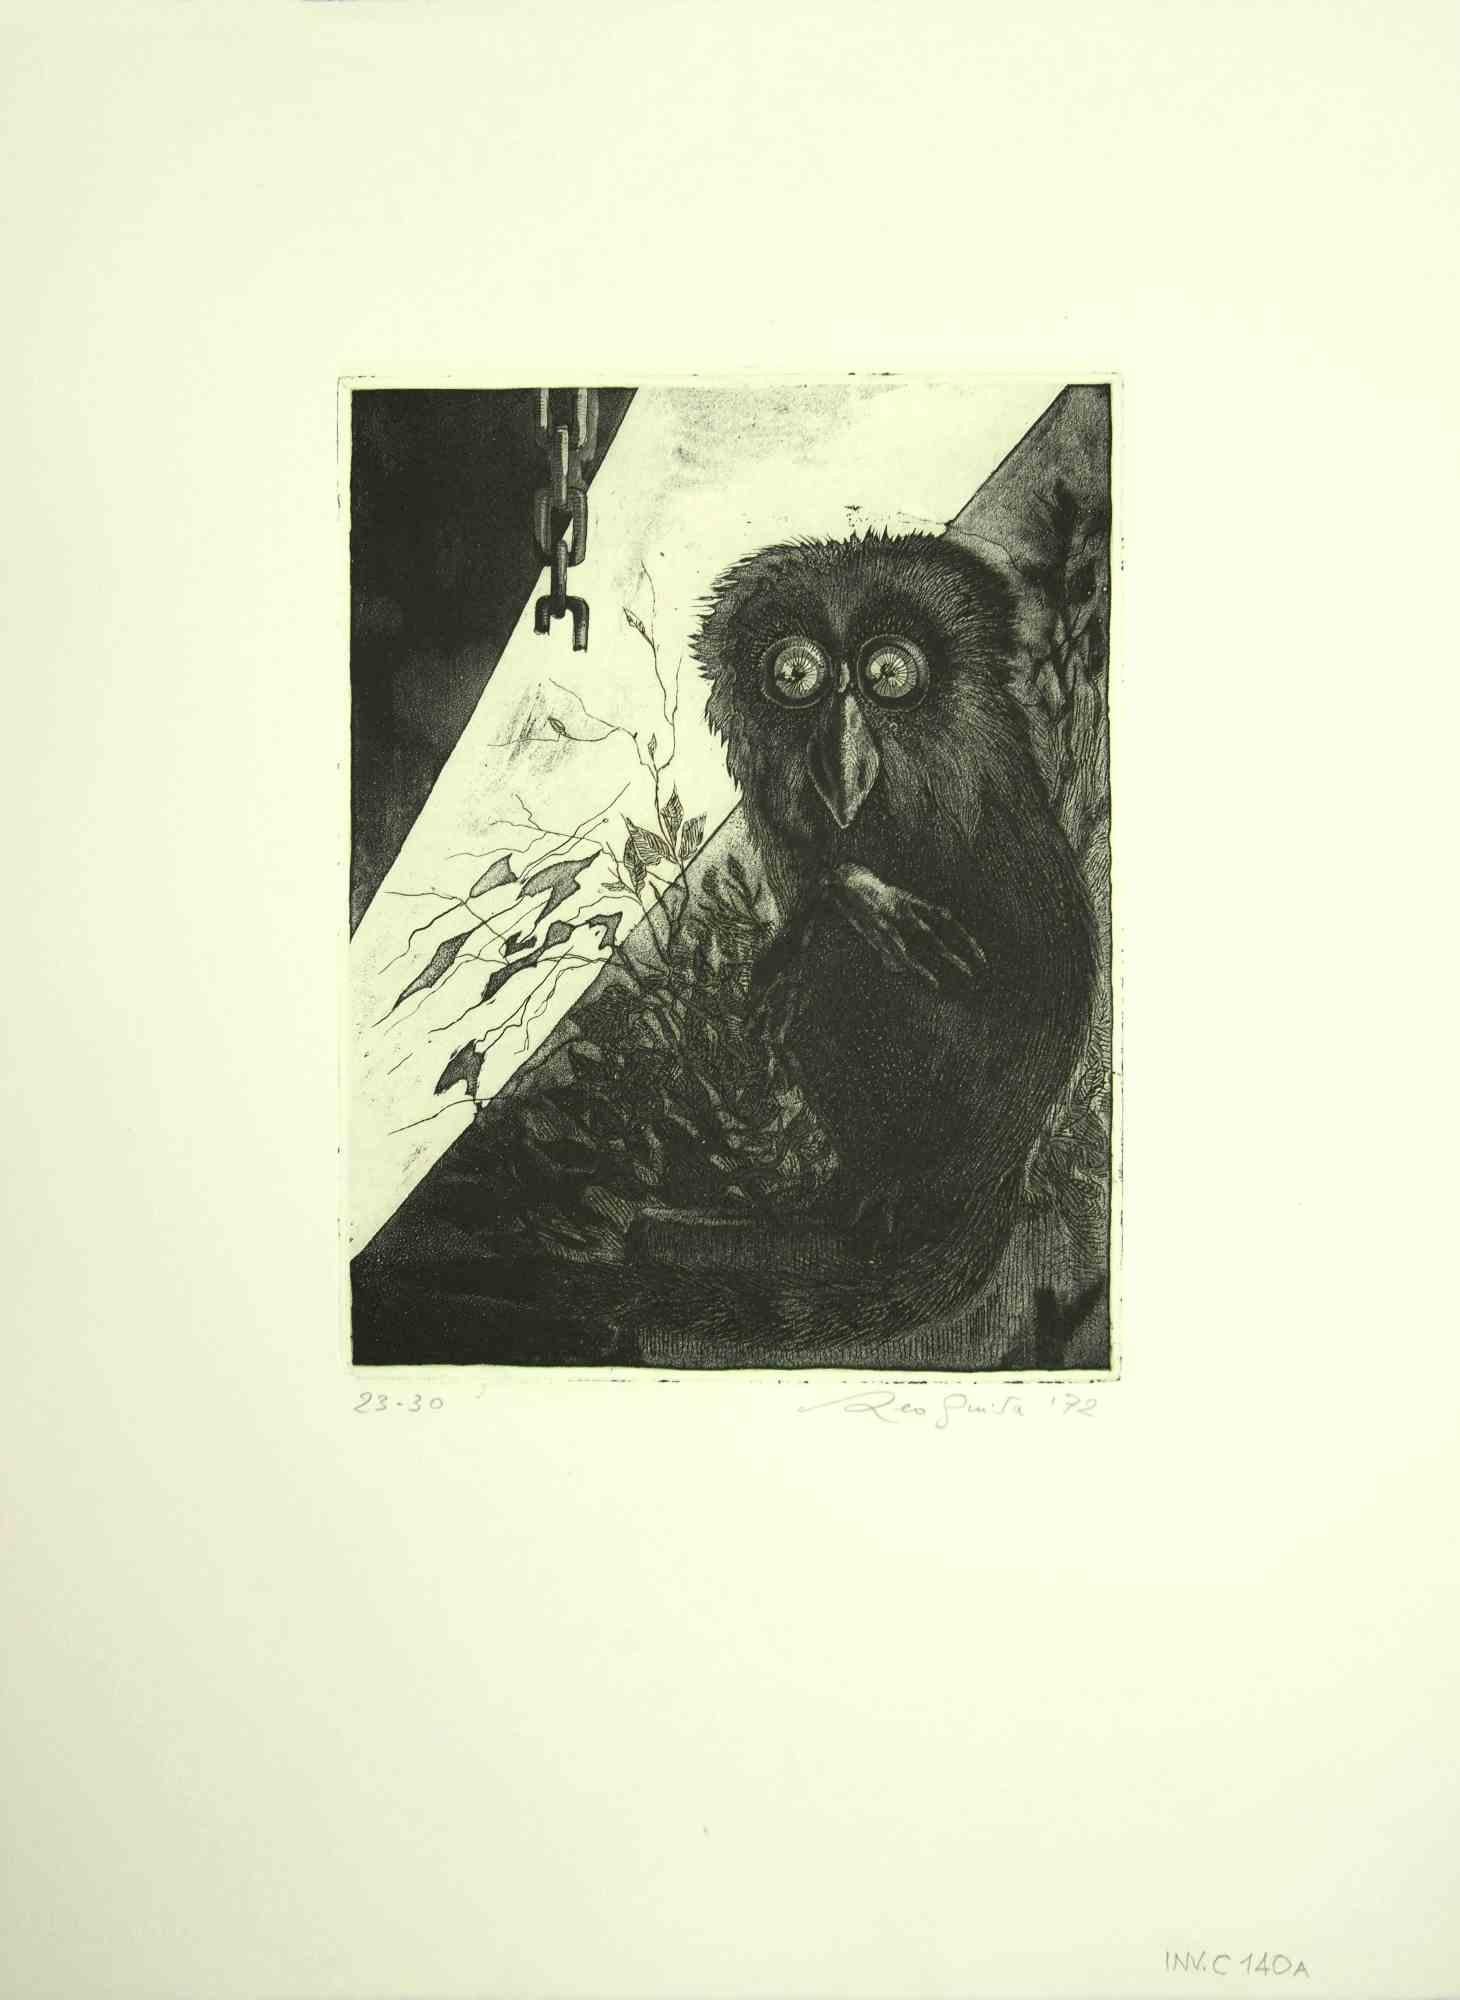 The Lemur is an original etching print realized by Leo Guida in 1970.

Hand-signed on the lower right and dated in pencil. Artist's proof, from the edition of 30 prints.

Tiled on the lower center in Italian" Le Mure e Catena".

Good condition,